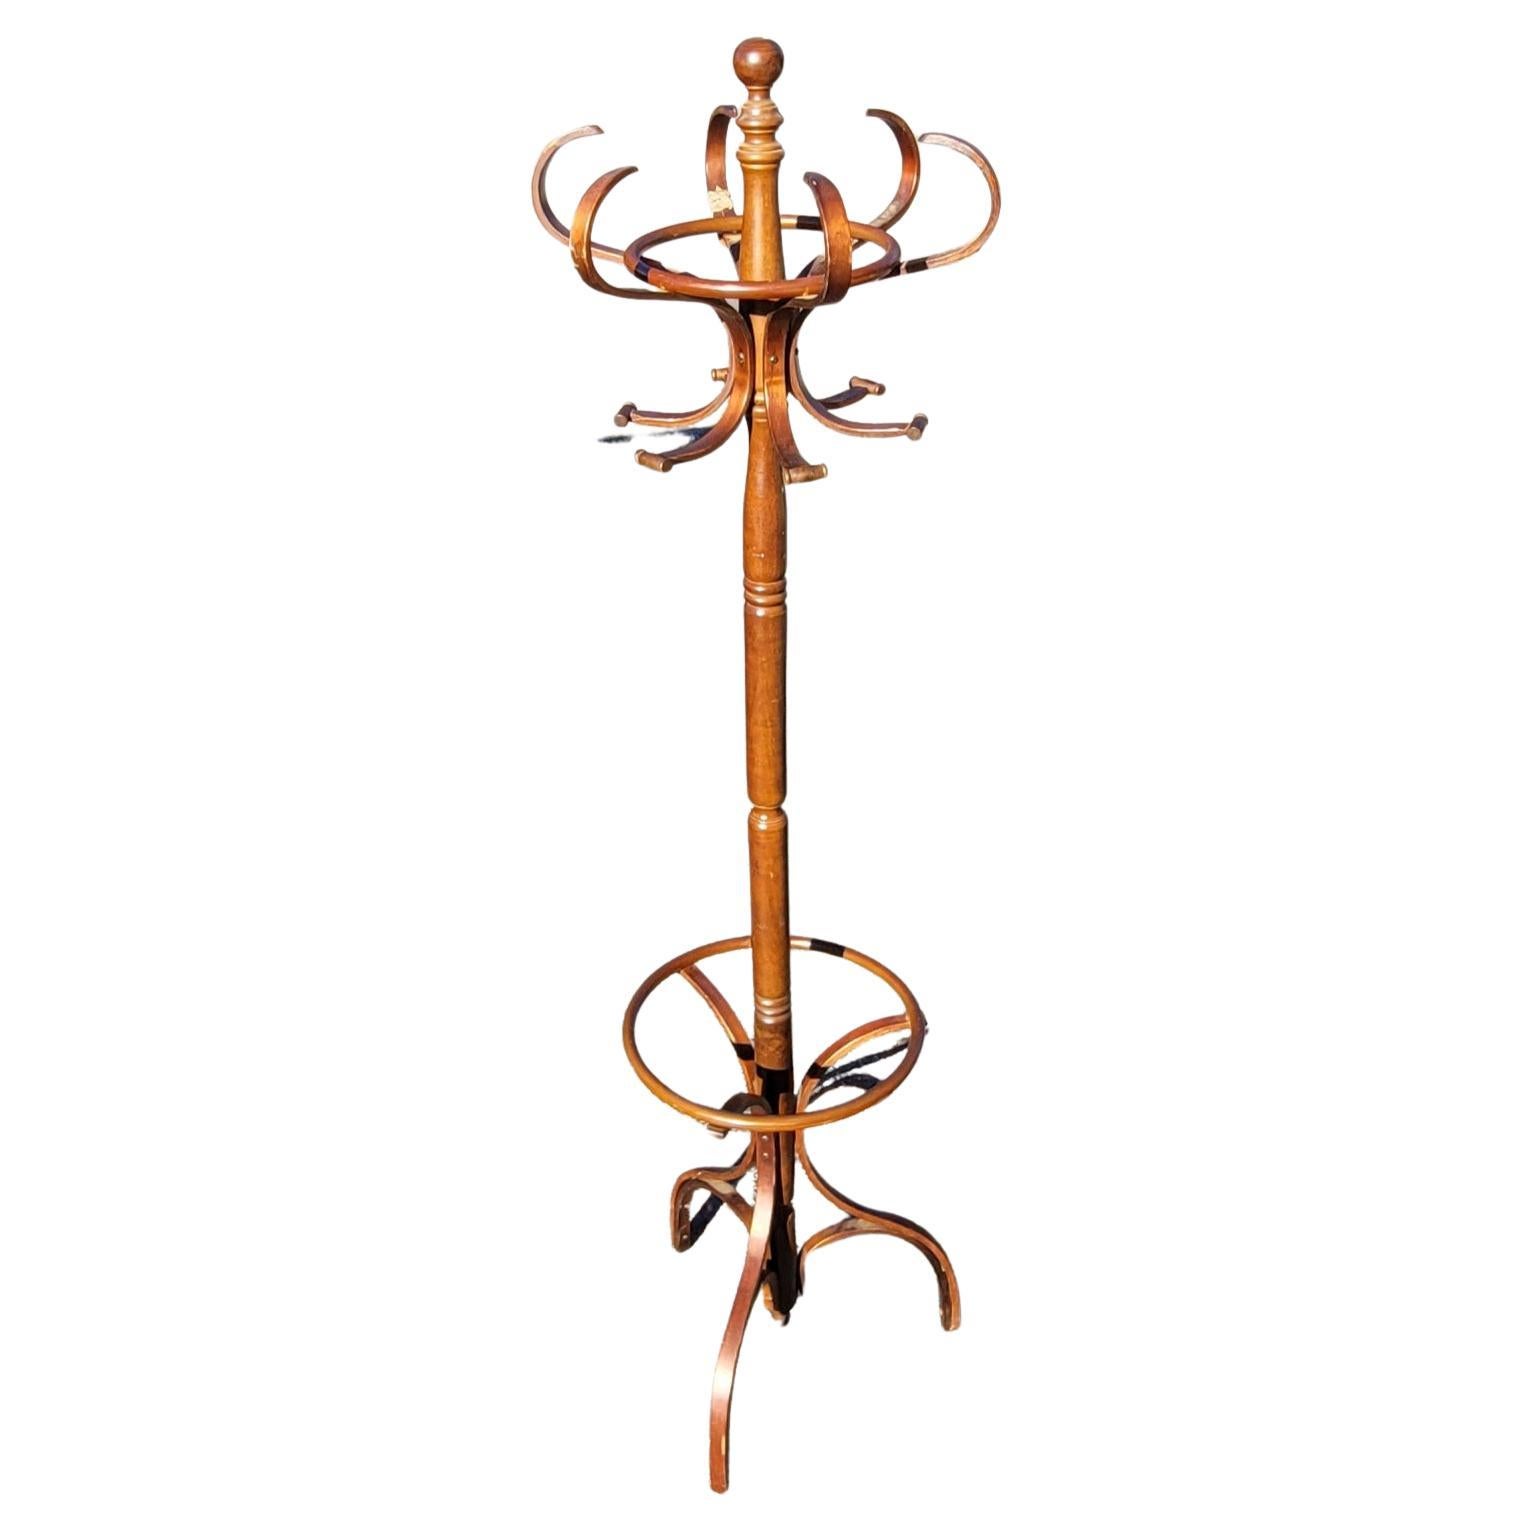 Vintage French bentwood thonet style hat and coat rack or hall tree clothing hanger with children clothes hooks, a wonderful middle 20th century bentwood hall stand, having six “S” shaped coat hooks and six bentwood scrolls for hats, surmounted by a